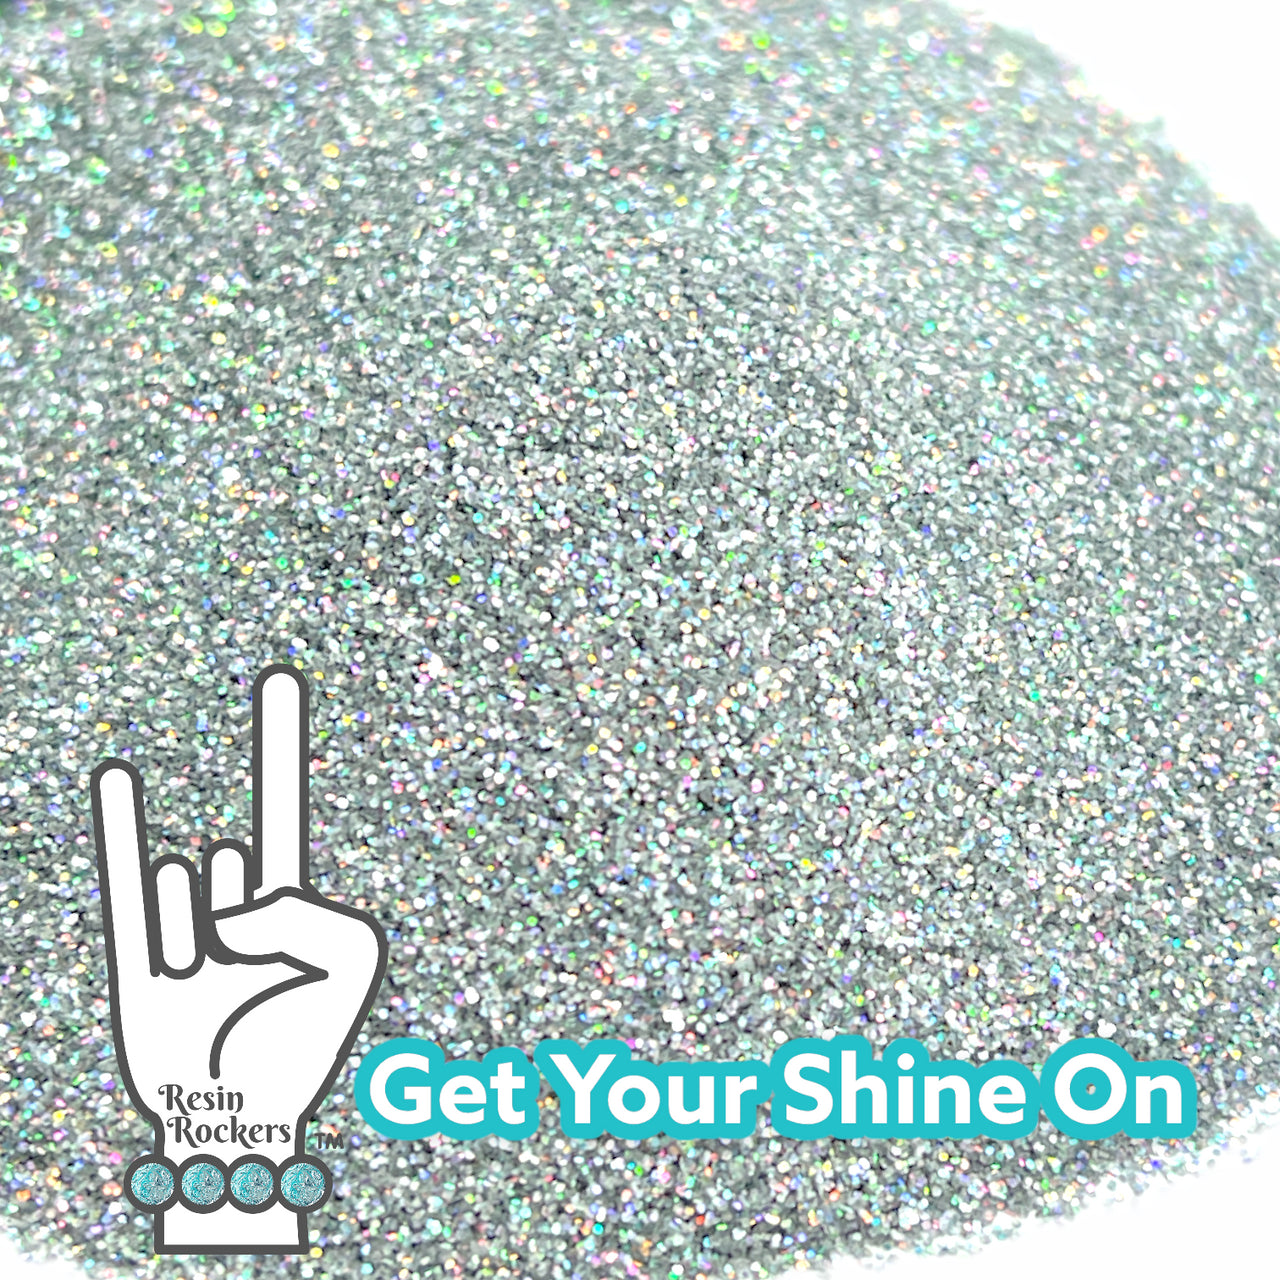 Navy Holographic- 2 oz ultra fine Glitter & Pixie Dust Exclusive!